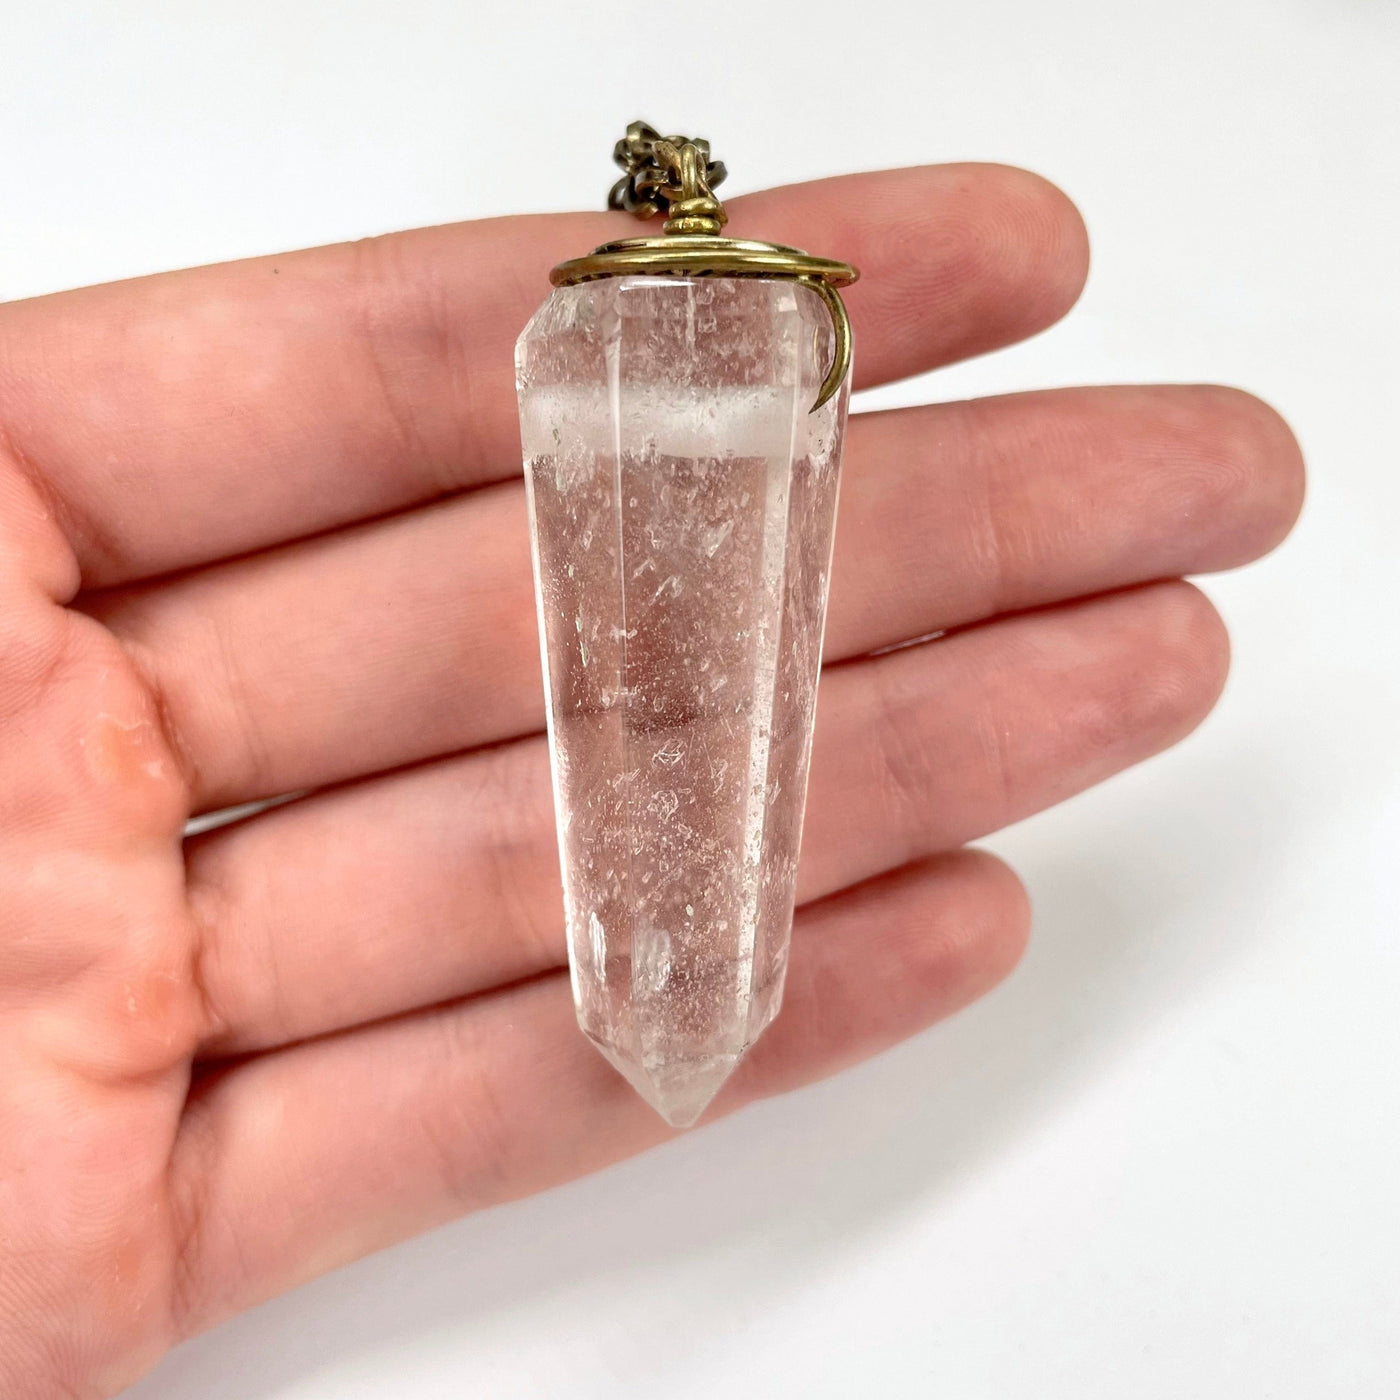 large center crystal quartz pendant in hand for size reference